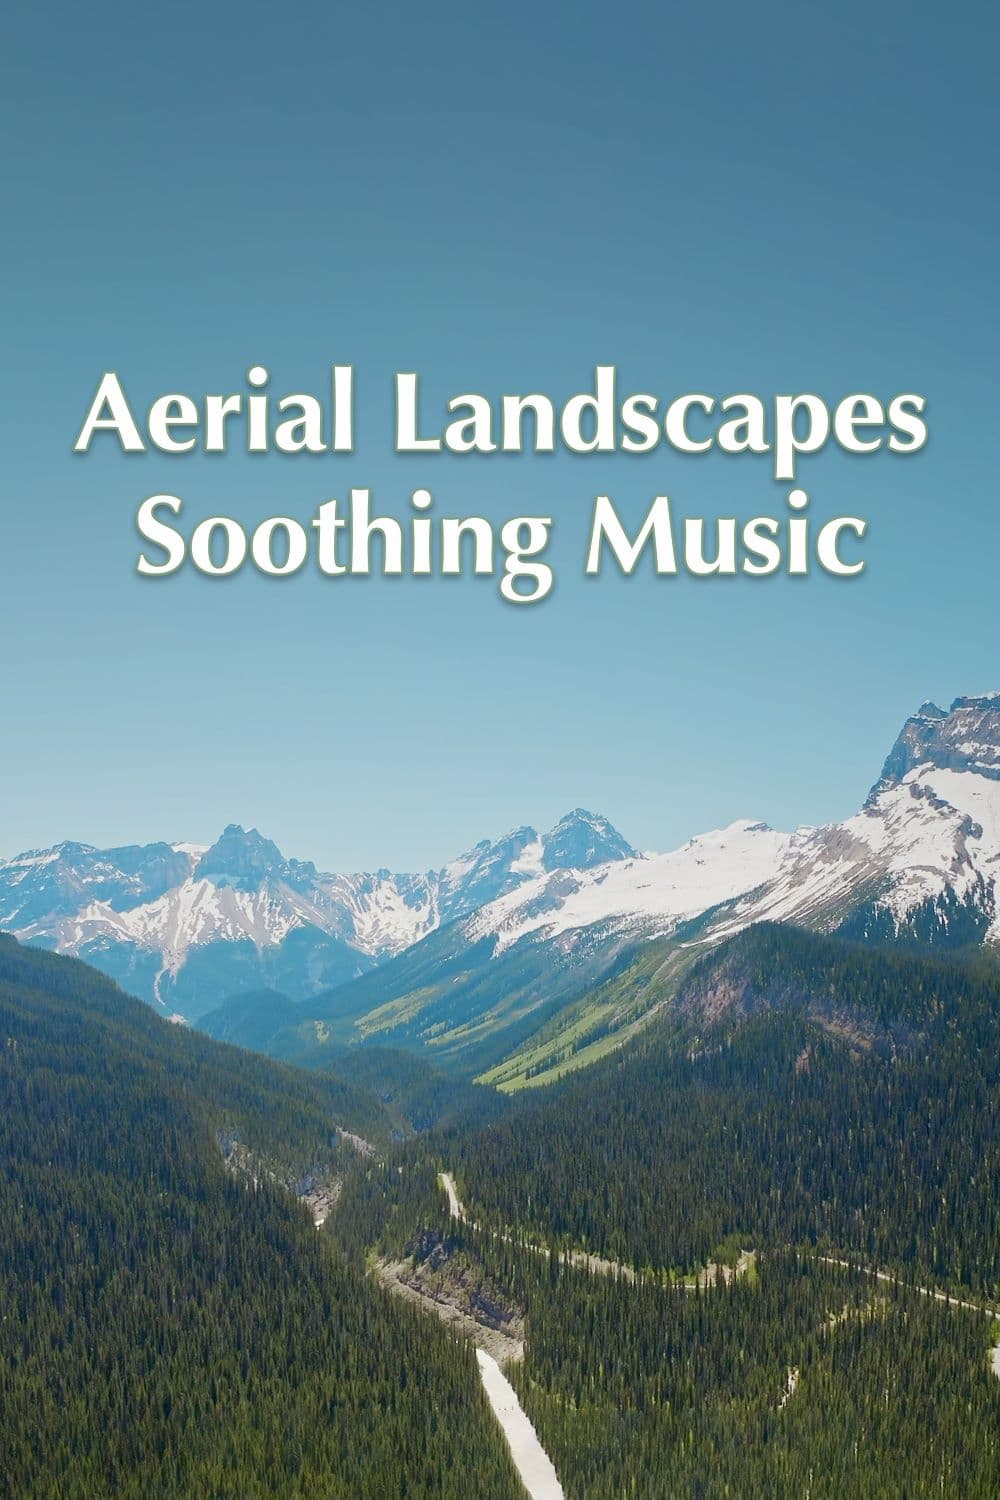 Aerial Landscape and Soothing Music